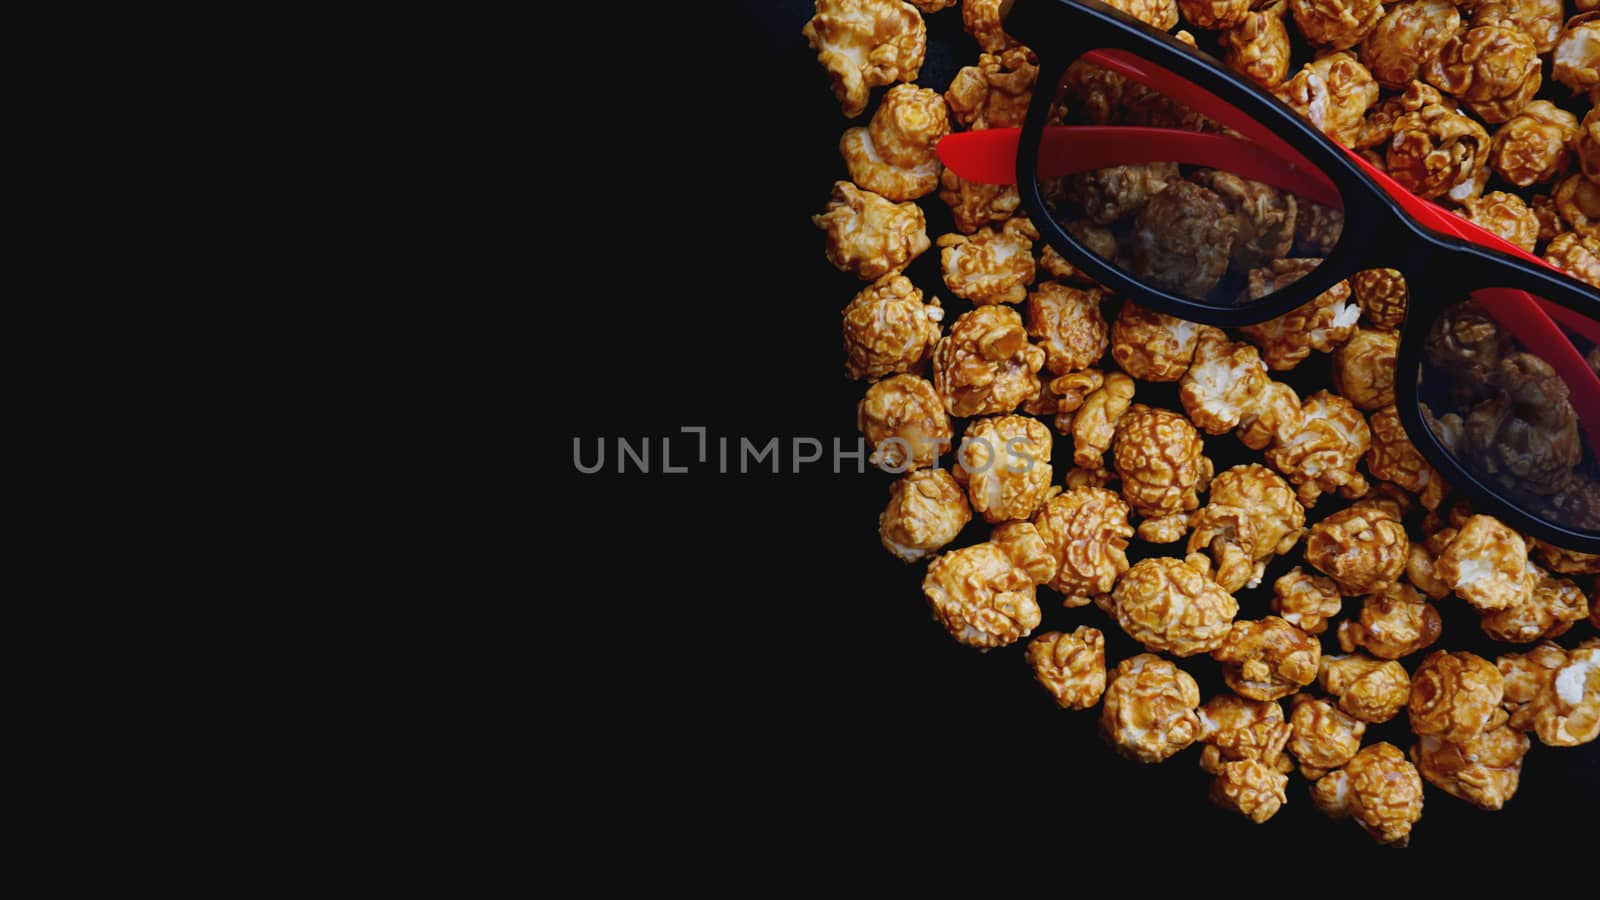 Abstract image of viewer, 3D glasses and popcorn on black background by natali_brill